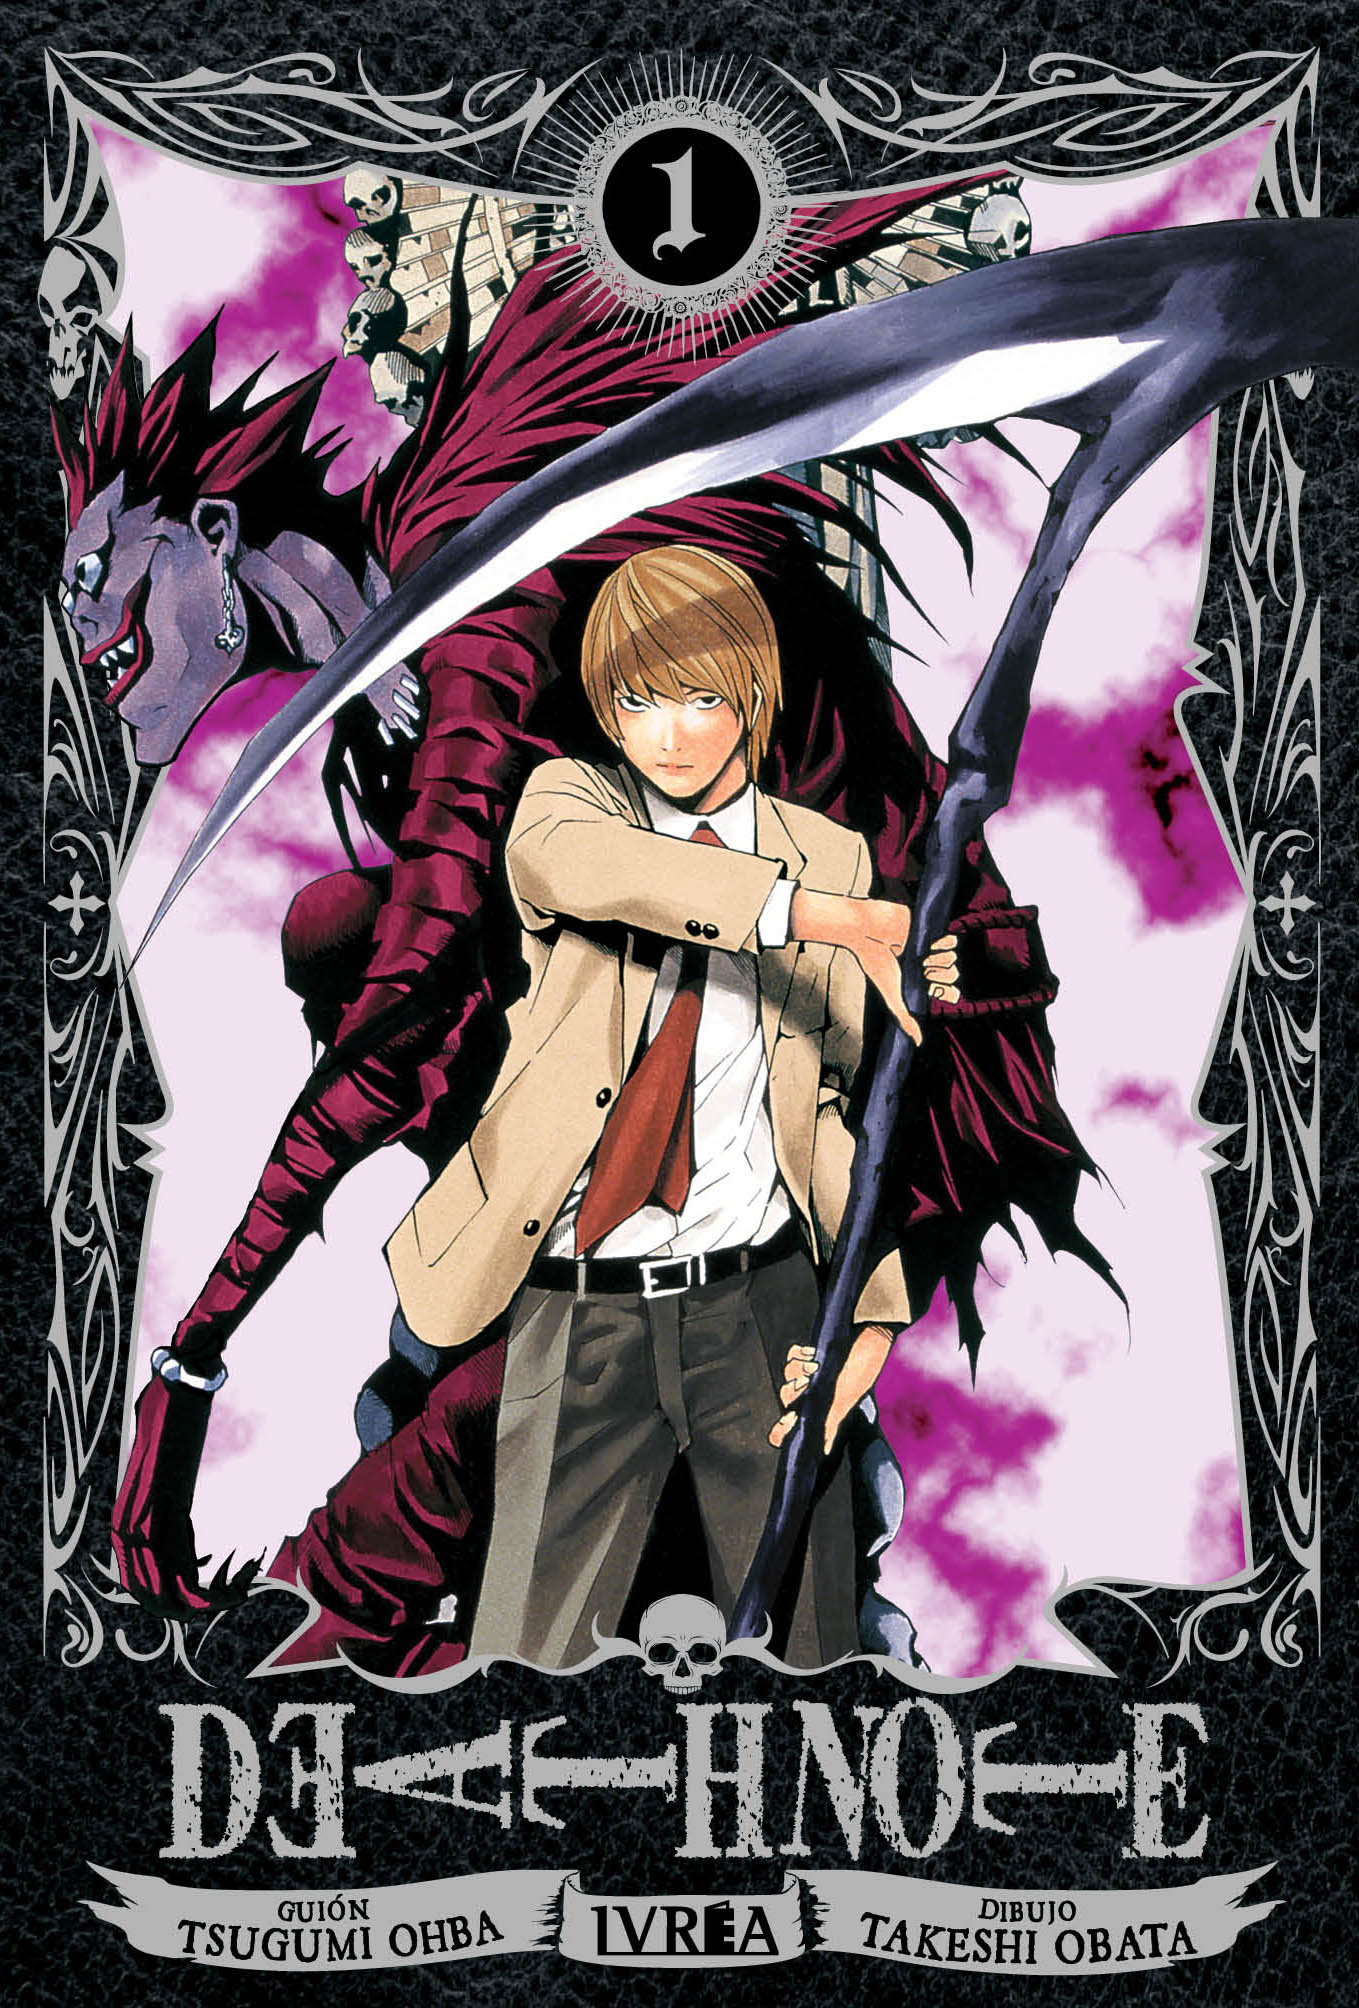  DEATH NOTE #01